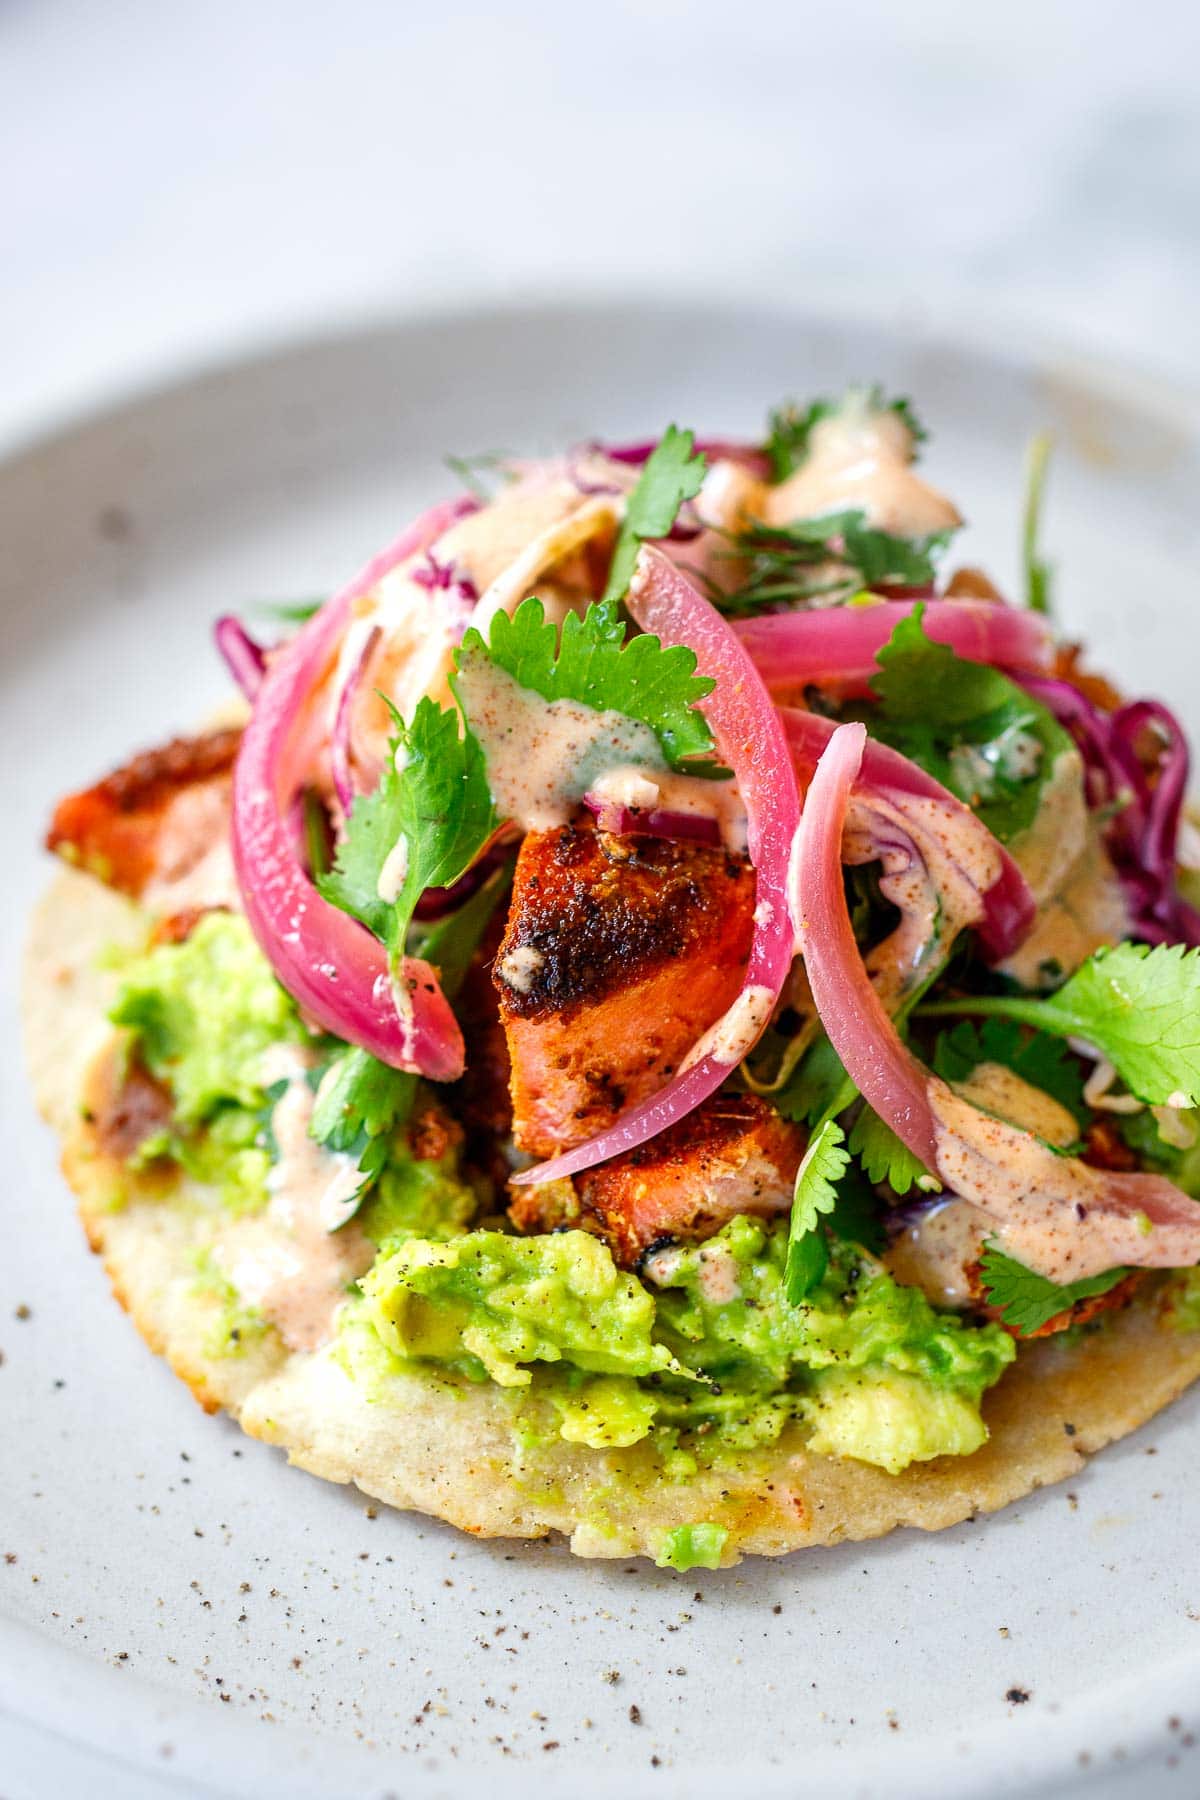 Salmon tacos with avocado, cabbage fennel slaw, ad taco sauce.